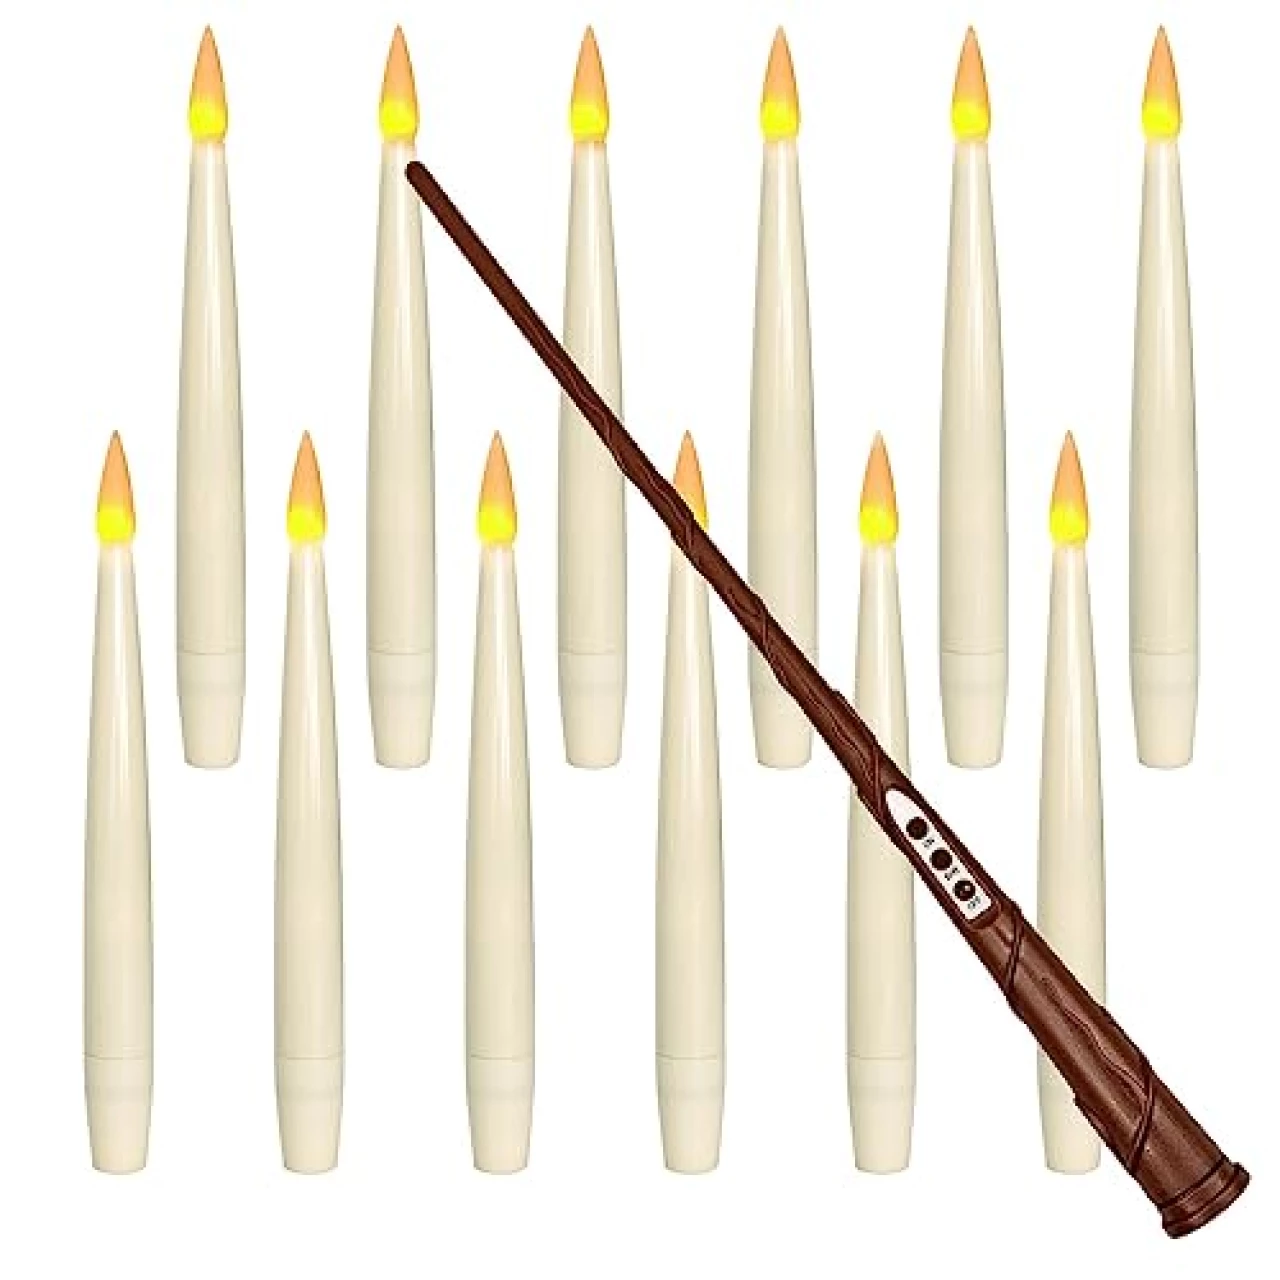 Leejec Floating Candles with Magic Wand Remote (6/18H Timer), Halloween Decorations, 12pcs 6.1” Hanging Flameless Taper Candles, Flickering Warm Light, Decor for Christmas, Wedding, Theme Party（ivory）